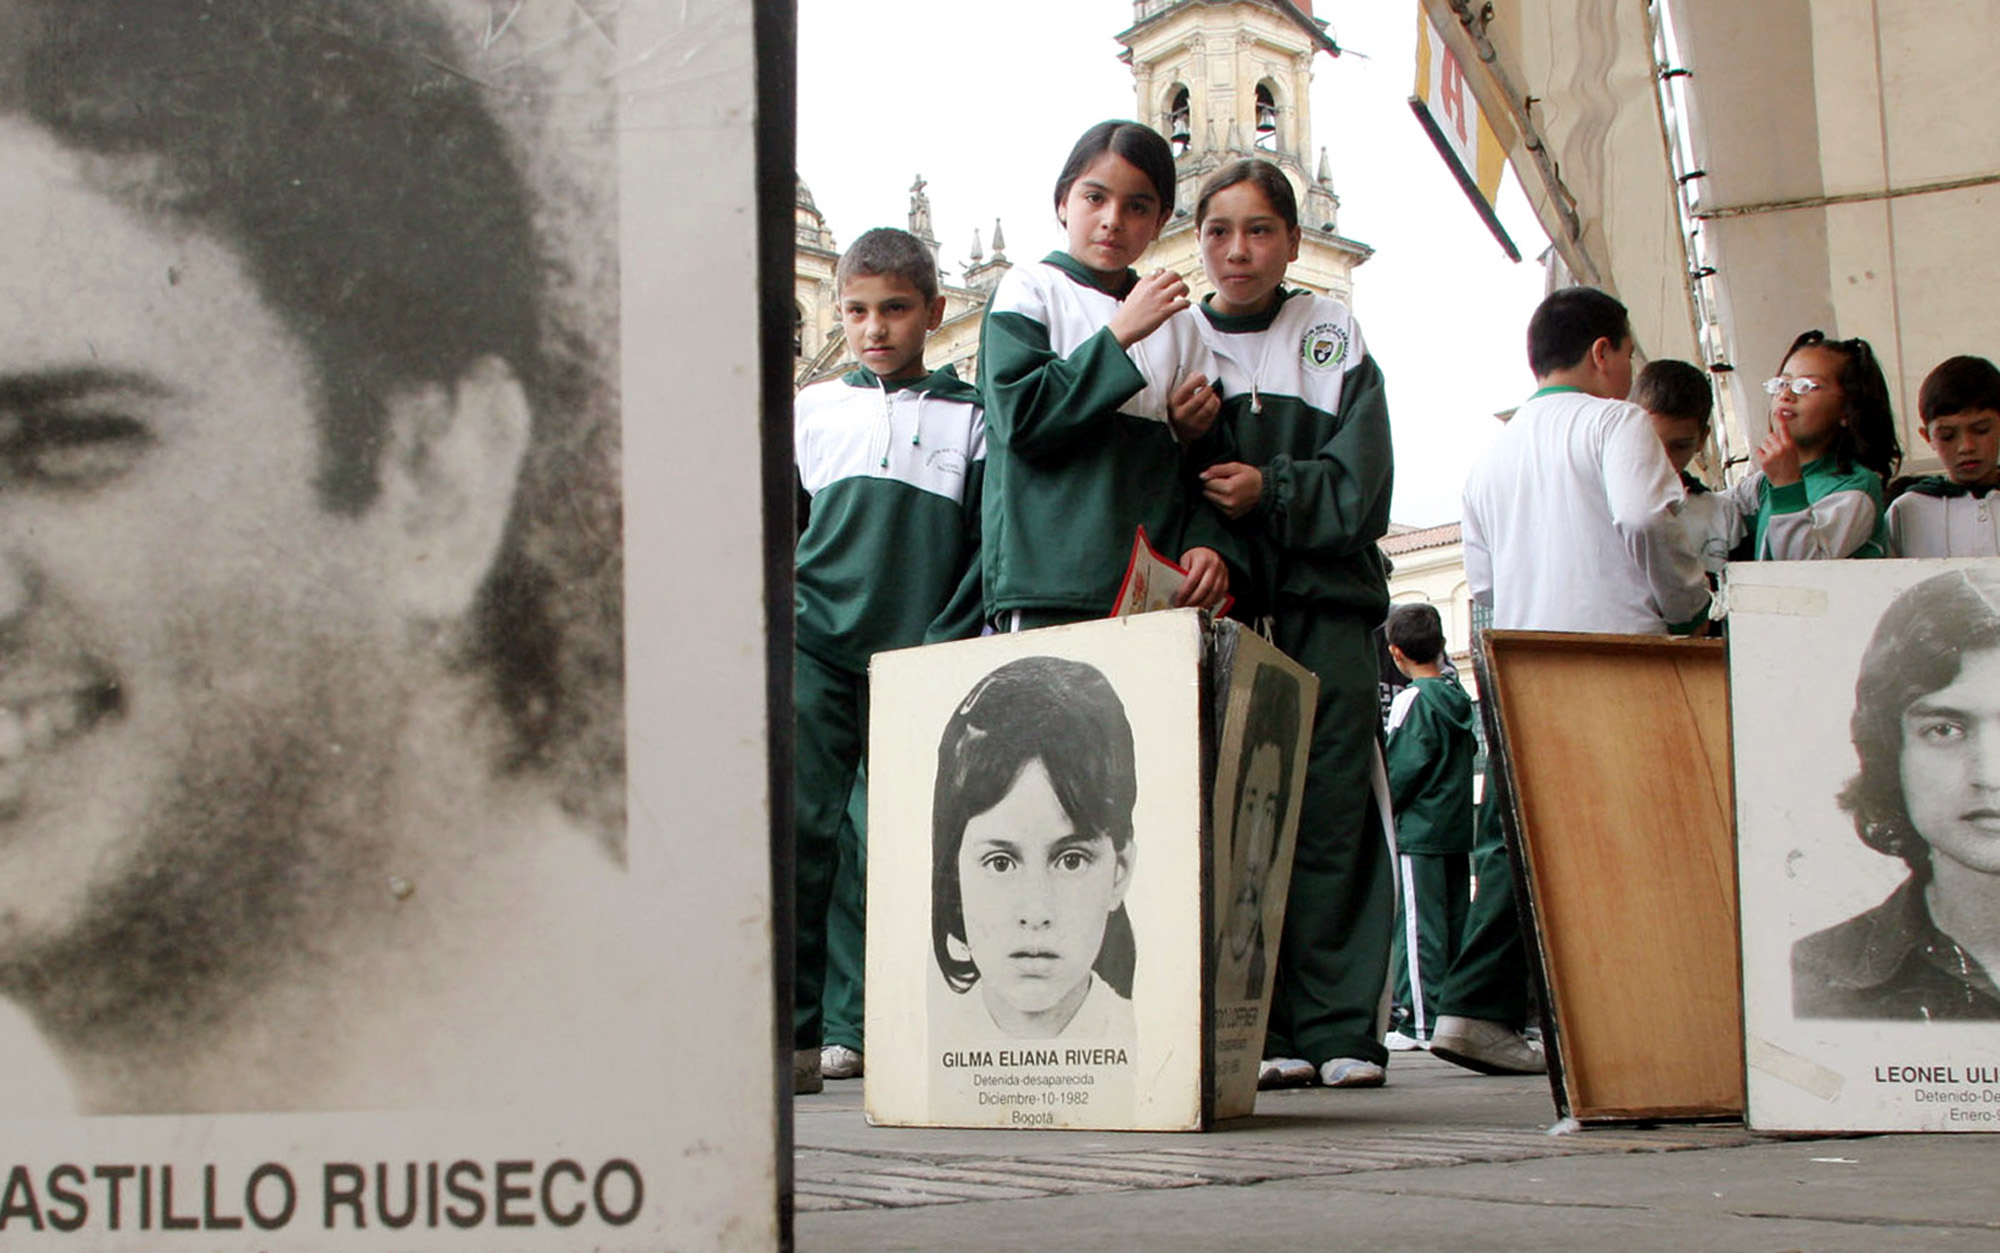 School children look at photos of the disappeared and killed that form part of an outdoor gallery of victims of paramilitary violence in Bogota, Colombia's main square, April 7, 2005. The Colombian Congress is currently debating a bill to grant leniency to paramilitary warlords who lay down their arms.(AP Photo/Fernando Vergara) **EFE OUT**